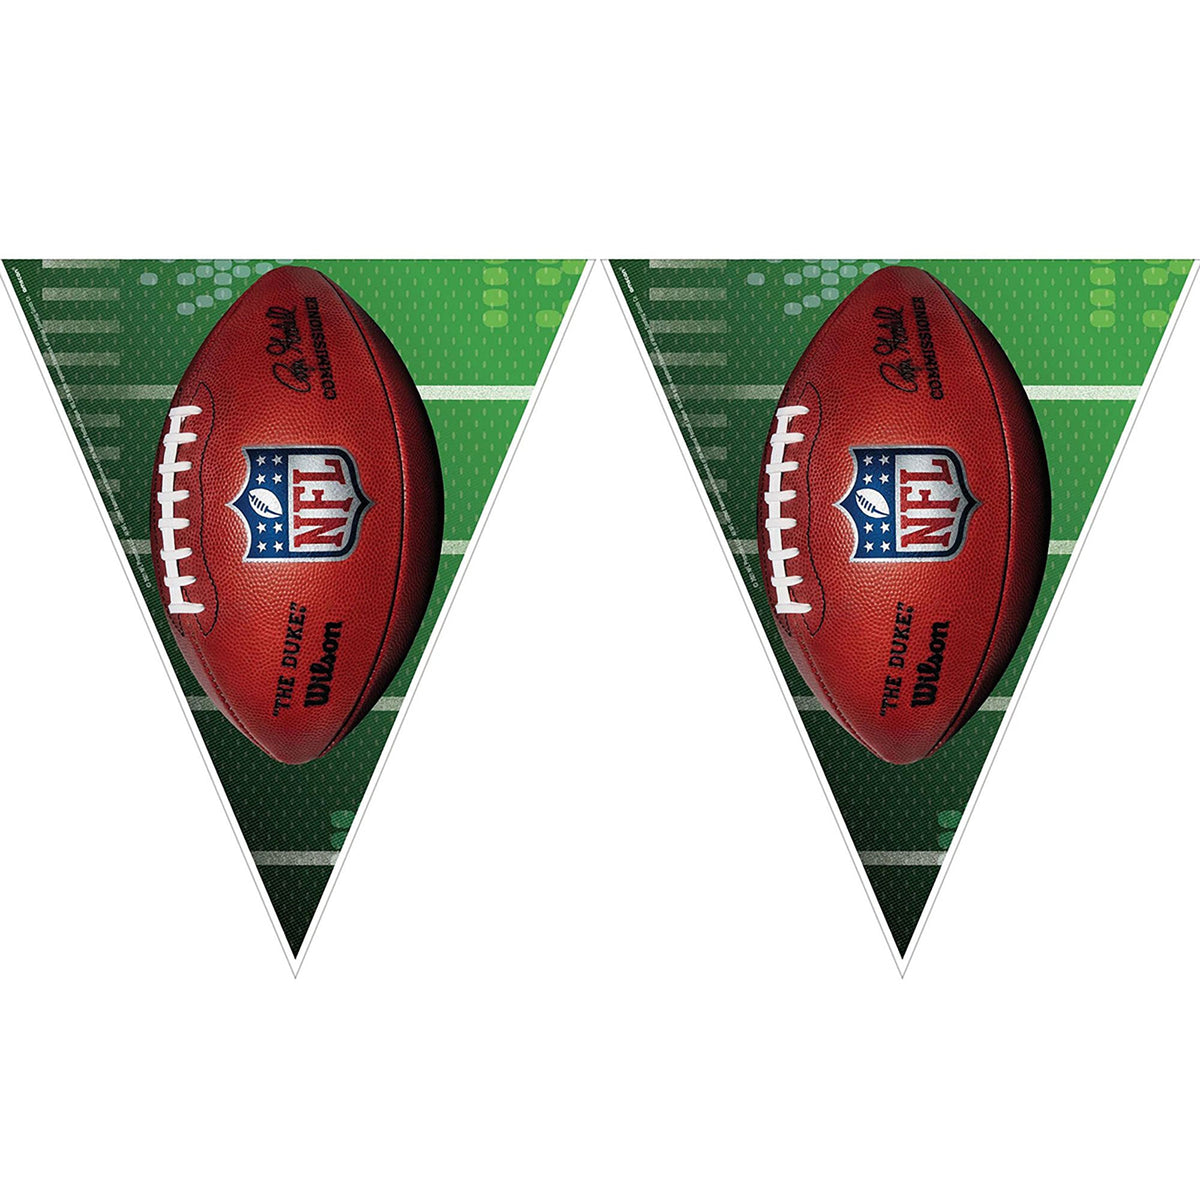 AMSCAN CA Superbowl NFL Super Bowl Party Plastic Banner, 12 X 11 Inches, 1 Count 192937219140